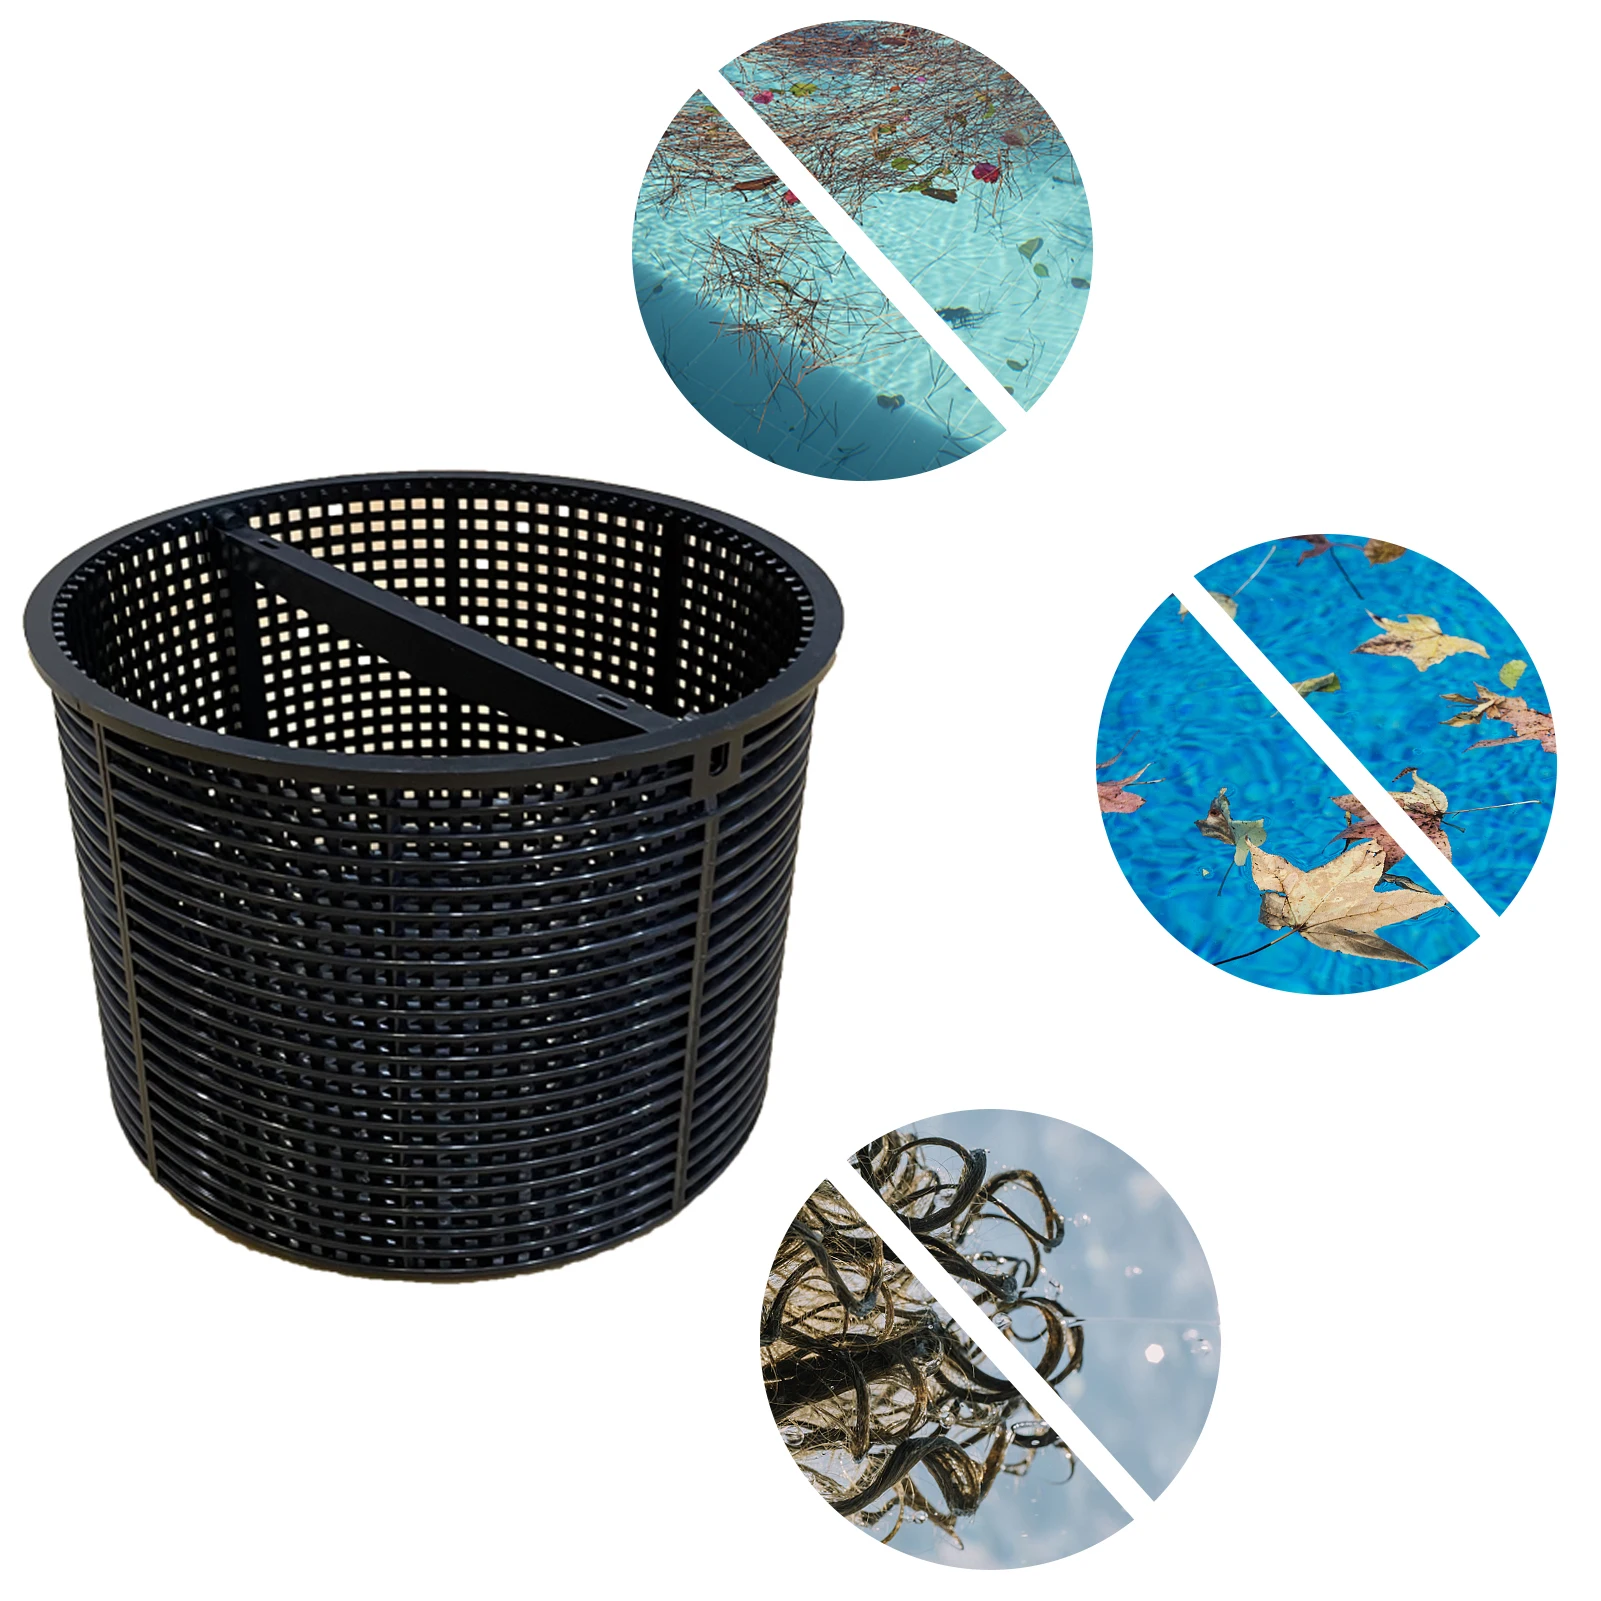 

Pool Filter Basket Replacement Durable Pool Skimmer Baskets Round Strainer Basket Skim Remove Leaves Bugs And Debris For Pools